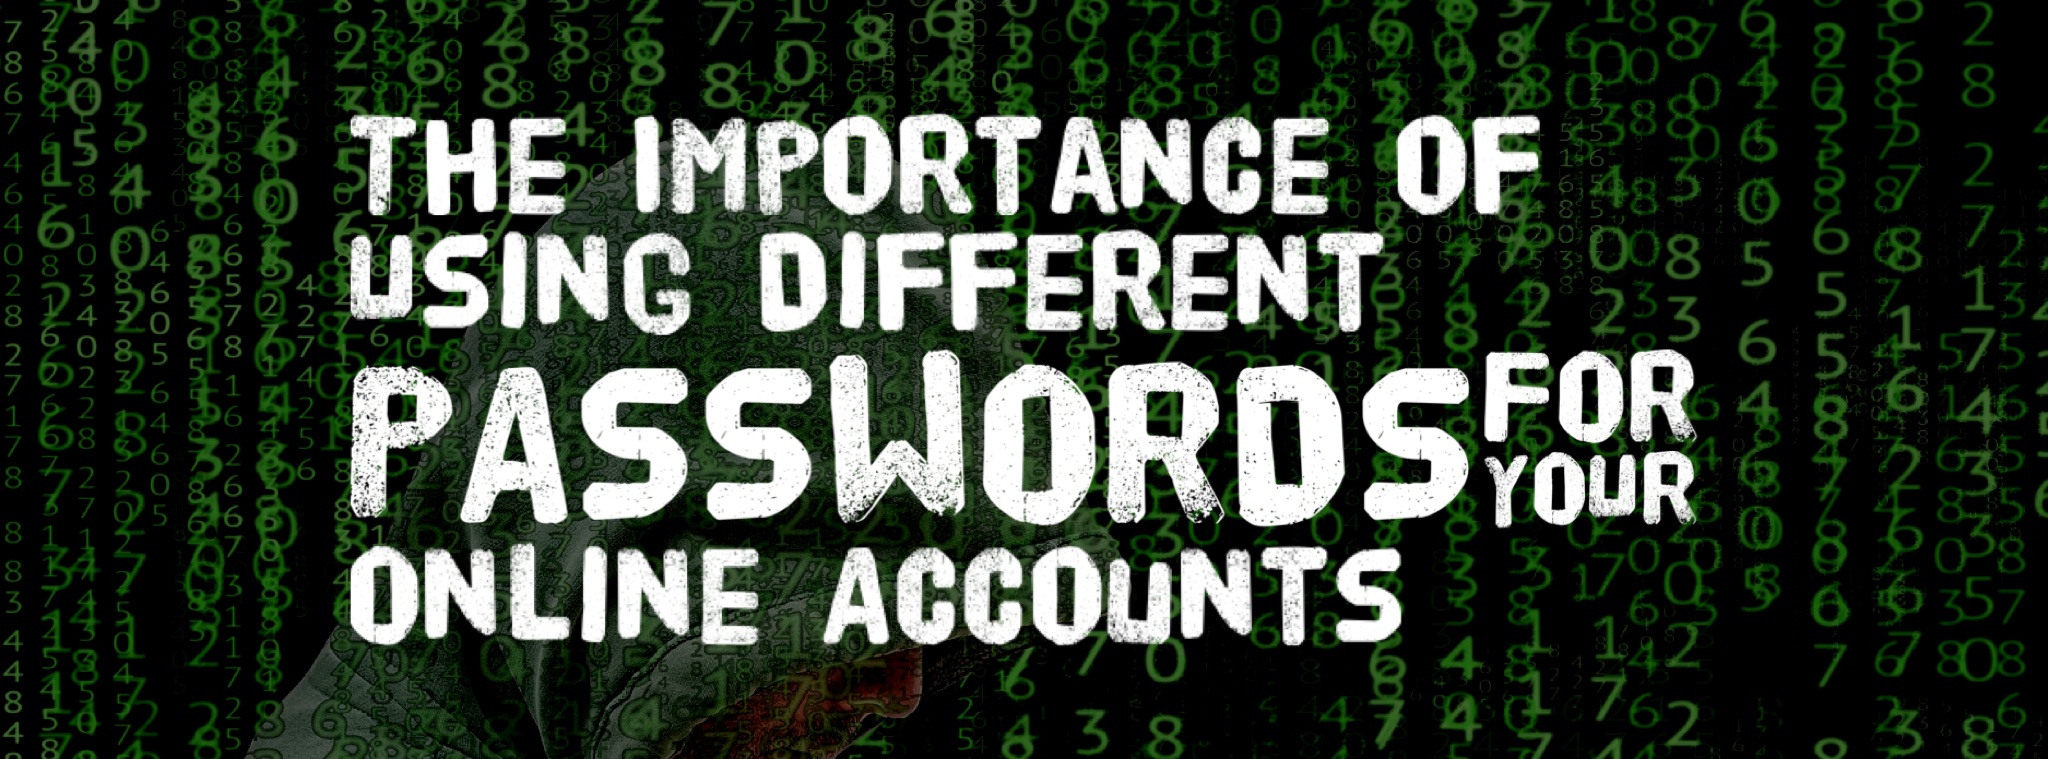 The Importance of Using Different Passwords for Your Online Accounts